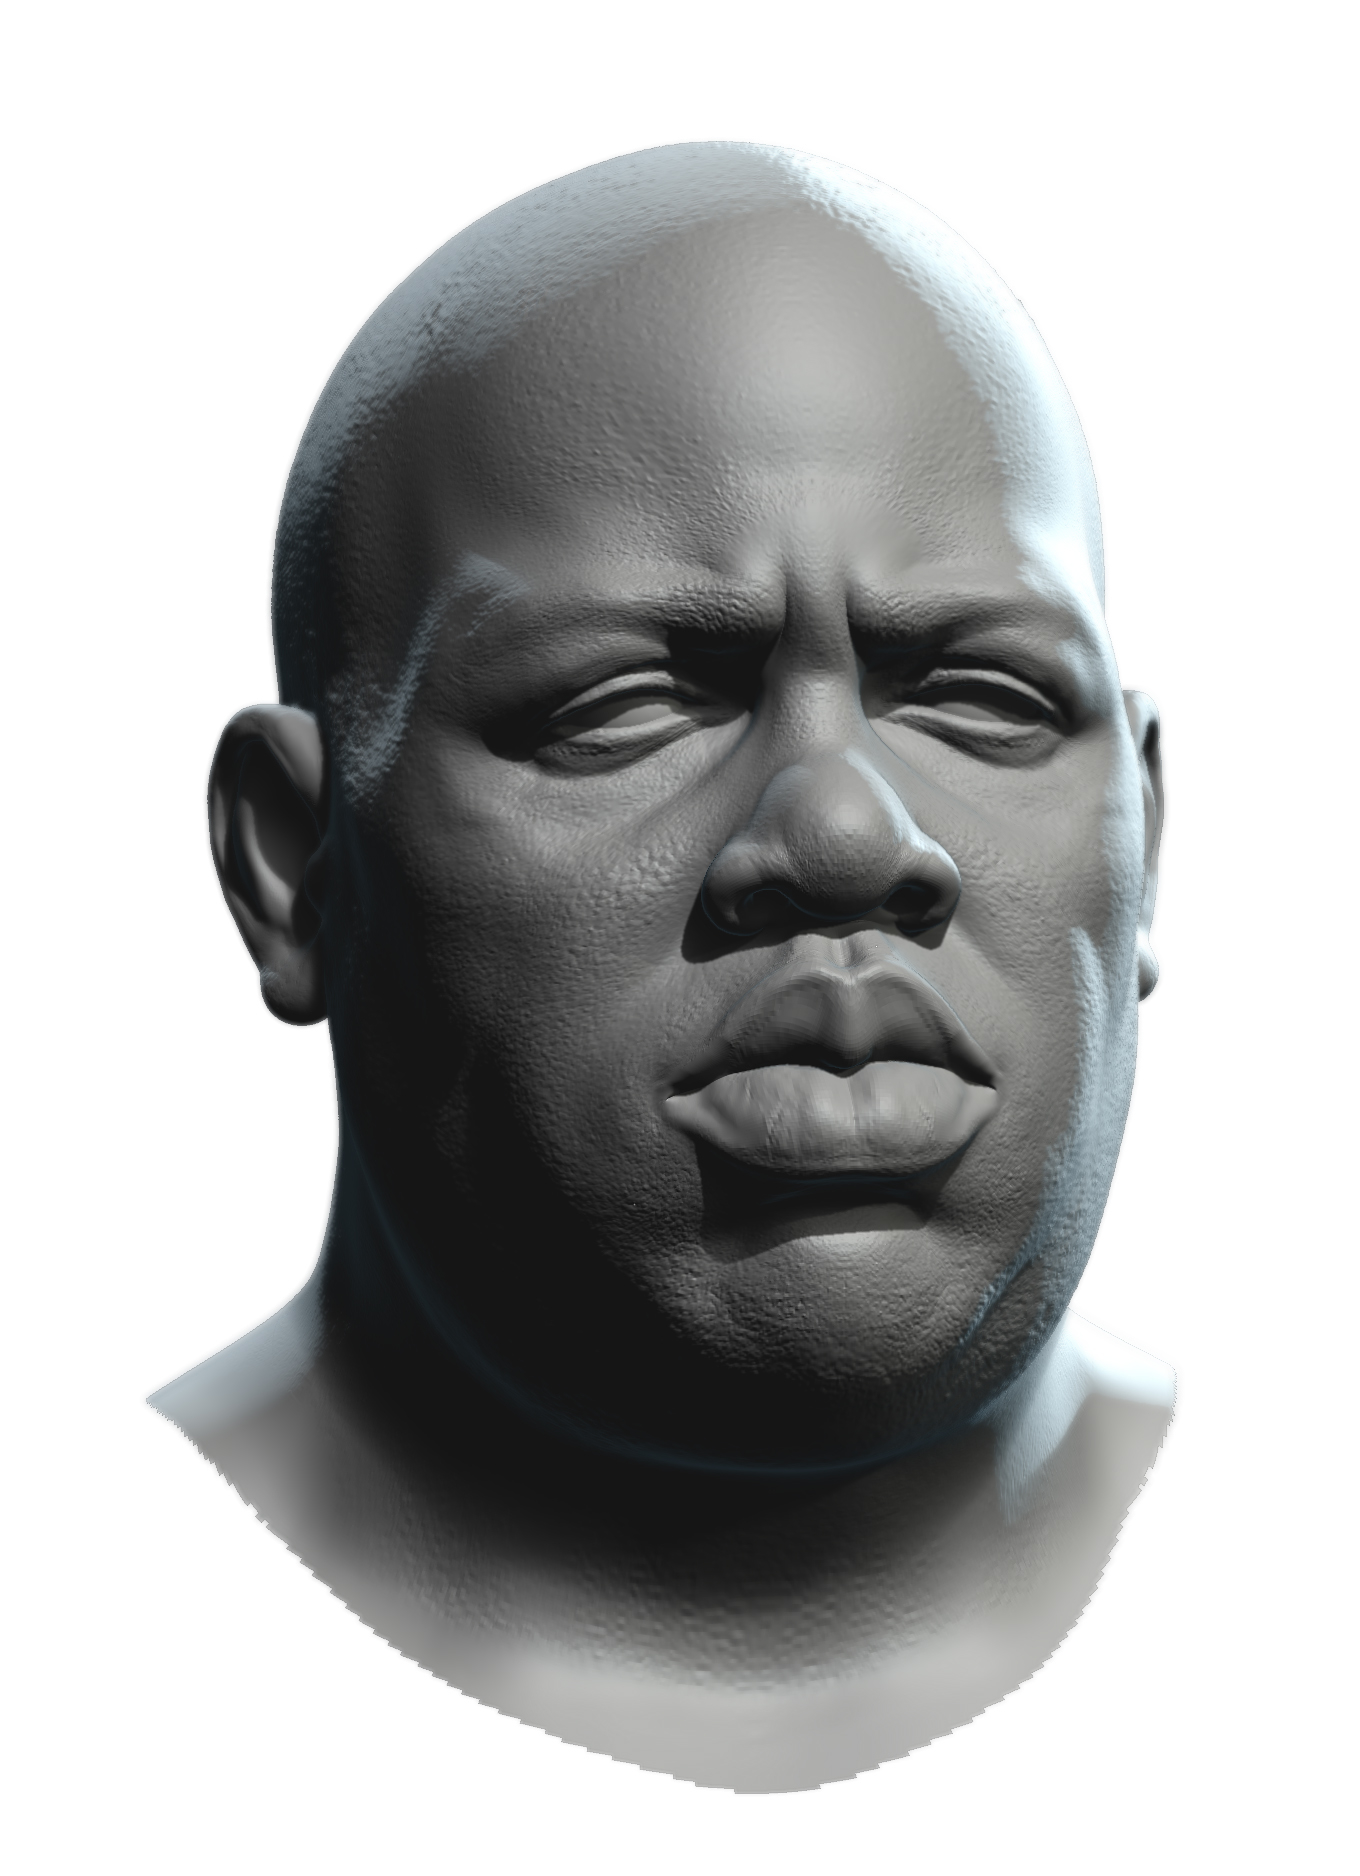 obj is faceted in zbrush